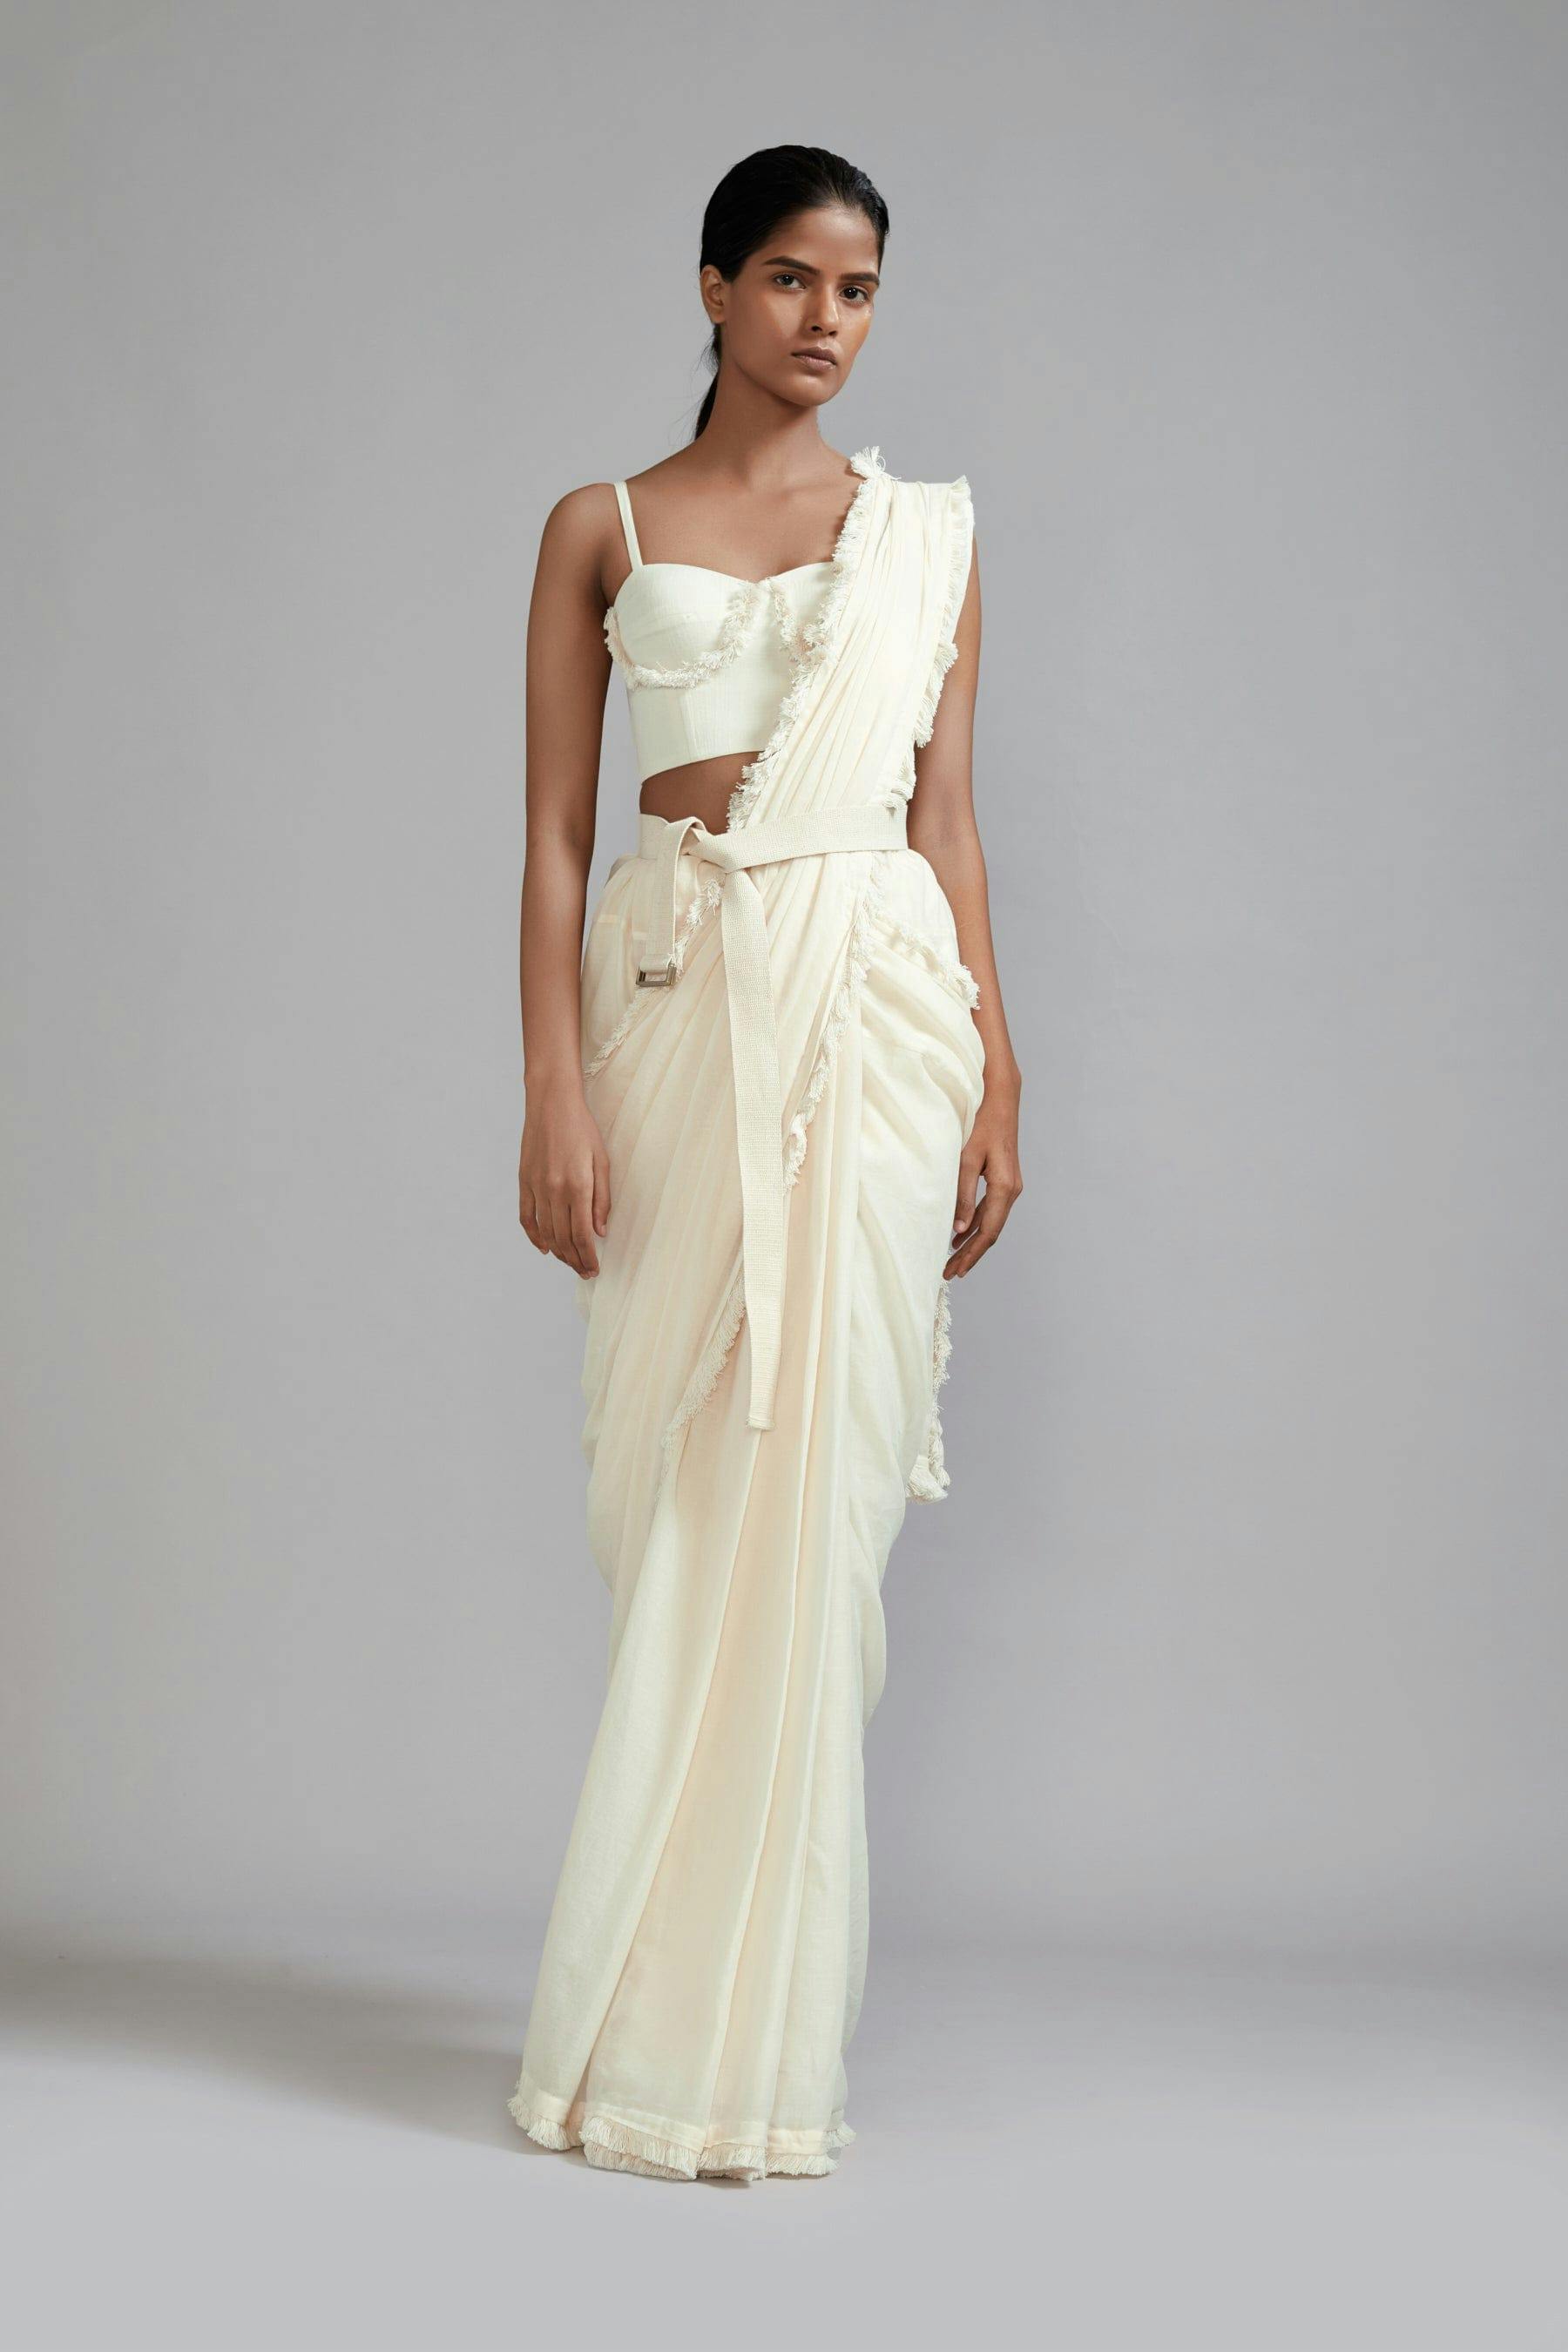 Off-White Fringed Saree, a product by Style Mati